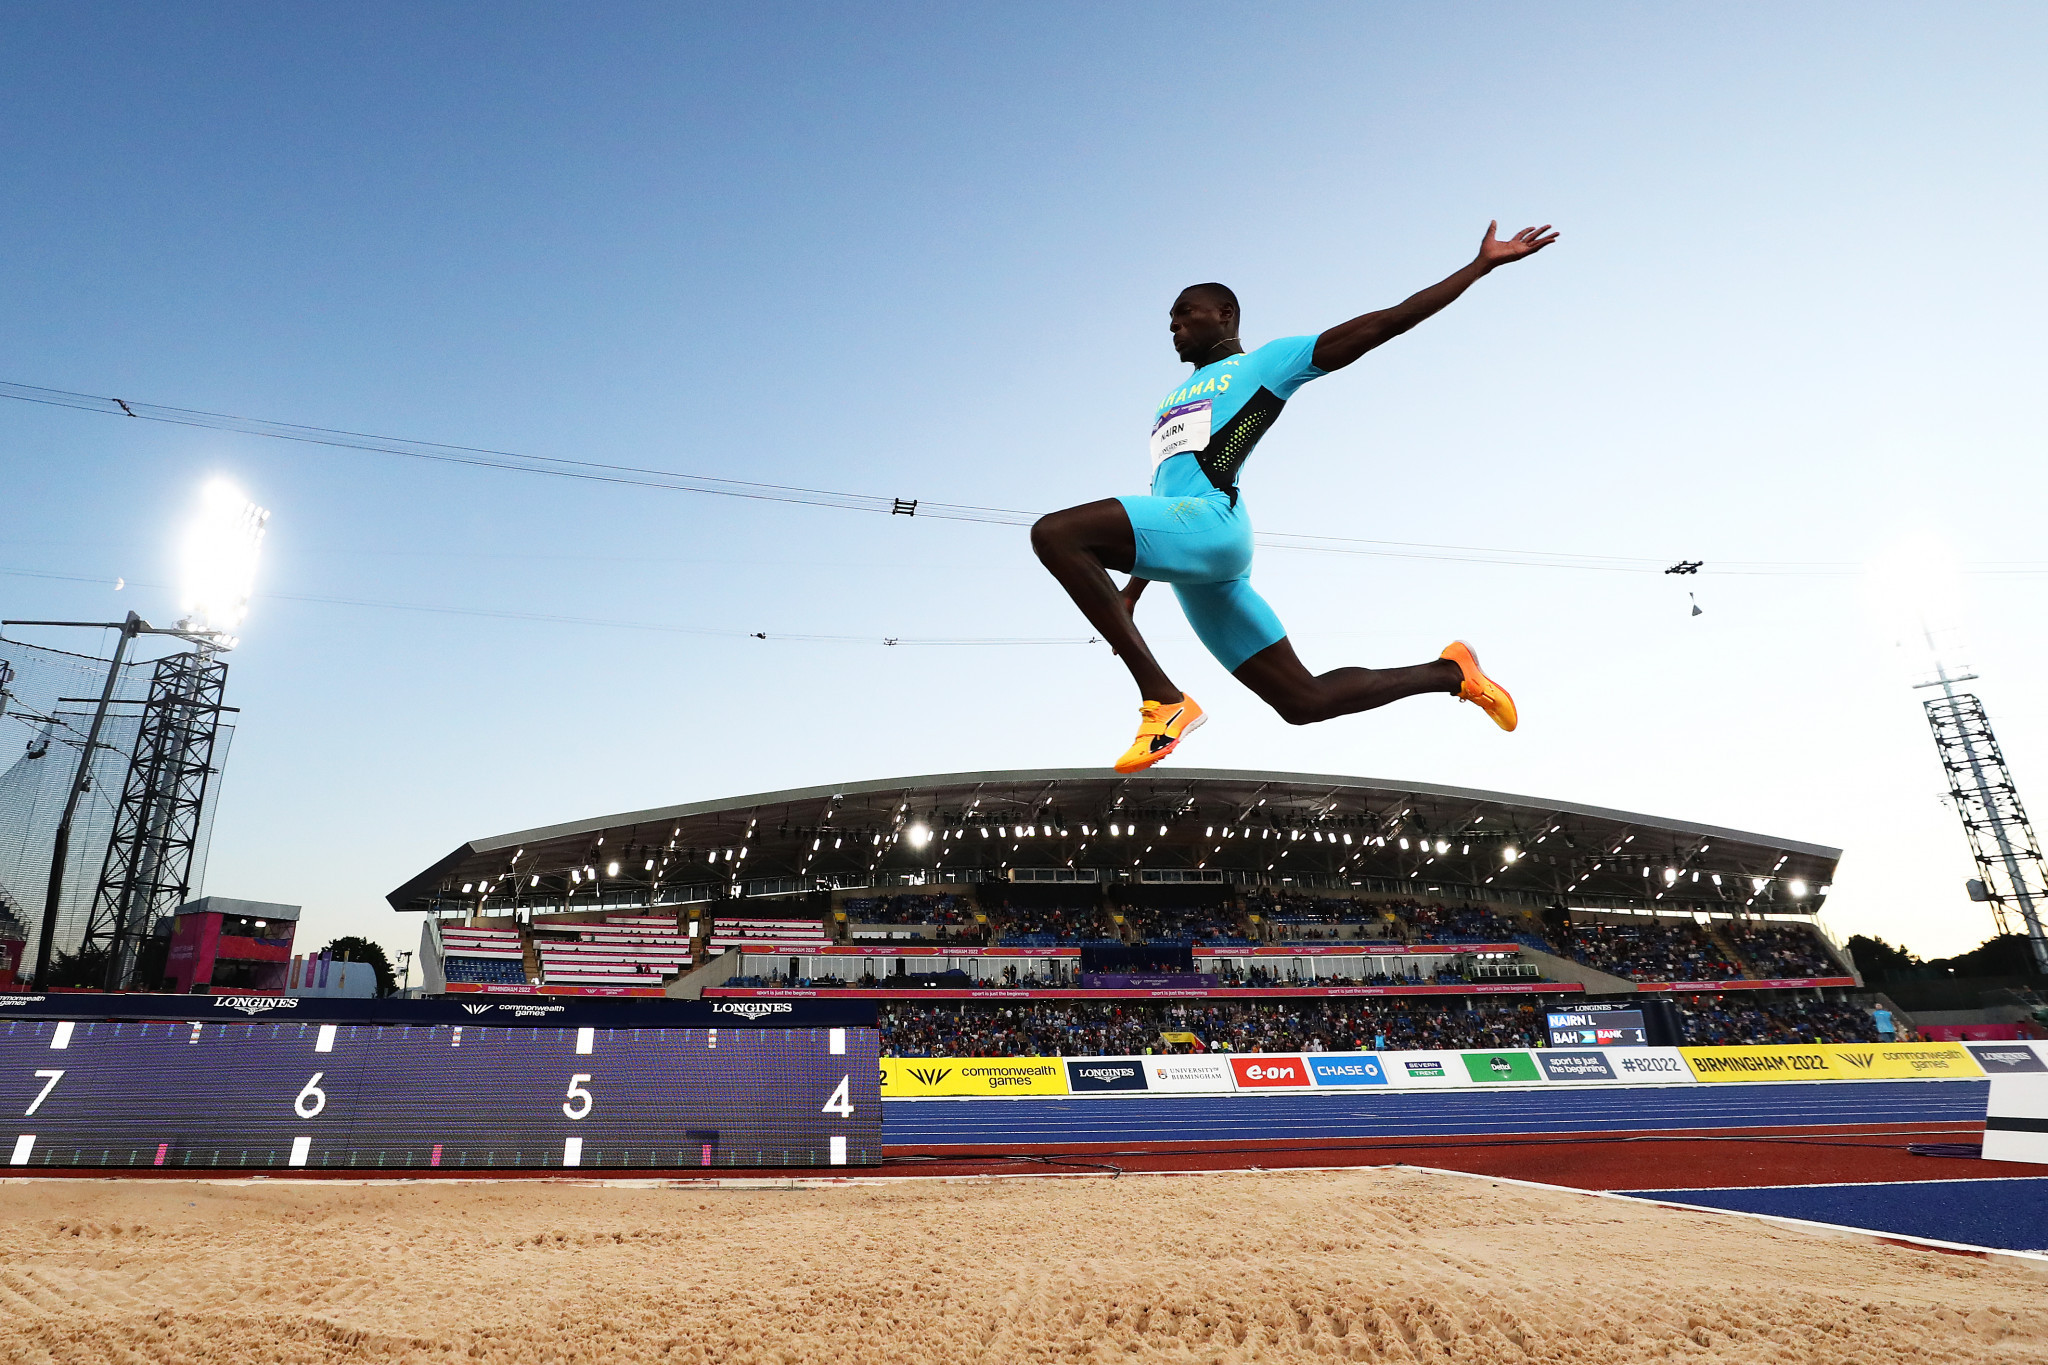 Laquan Nairn of The Bahamas is flying high as he wins the long jump title at the Alexander Stadium ©Getty Images